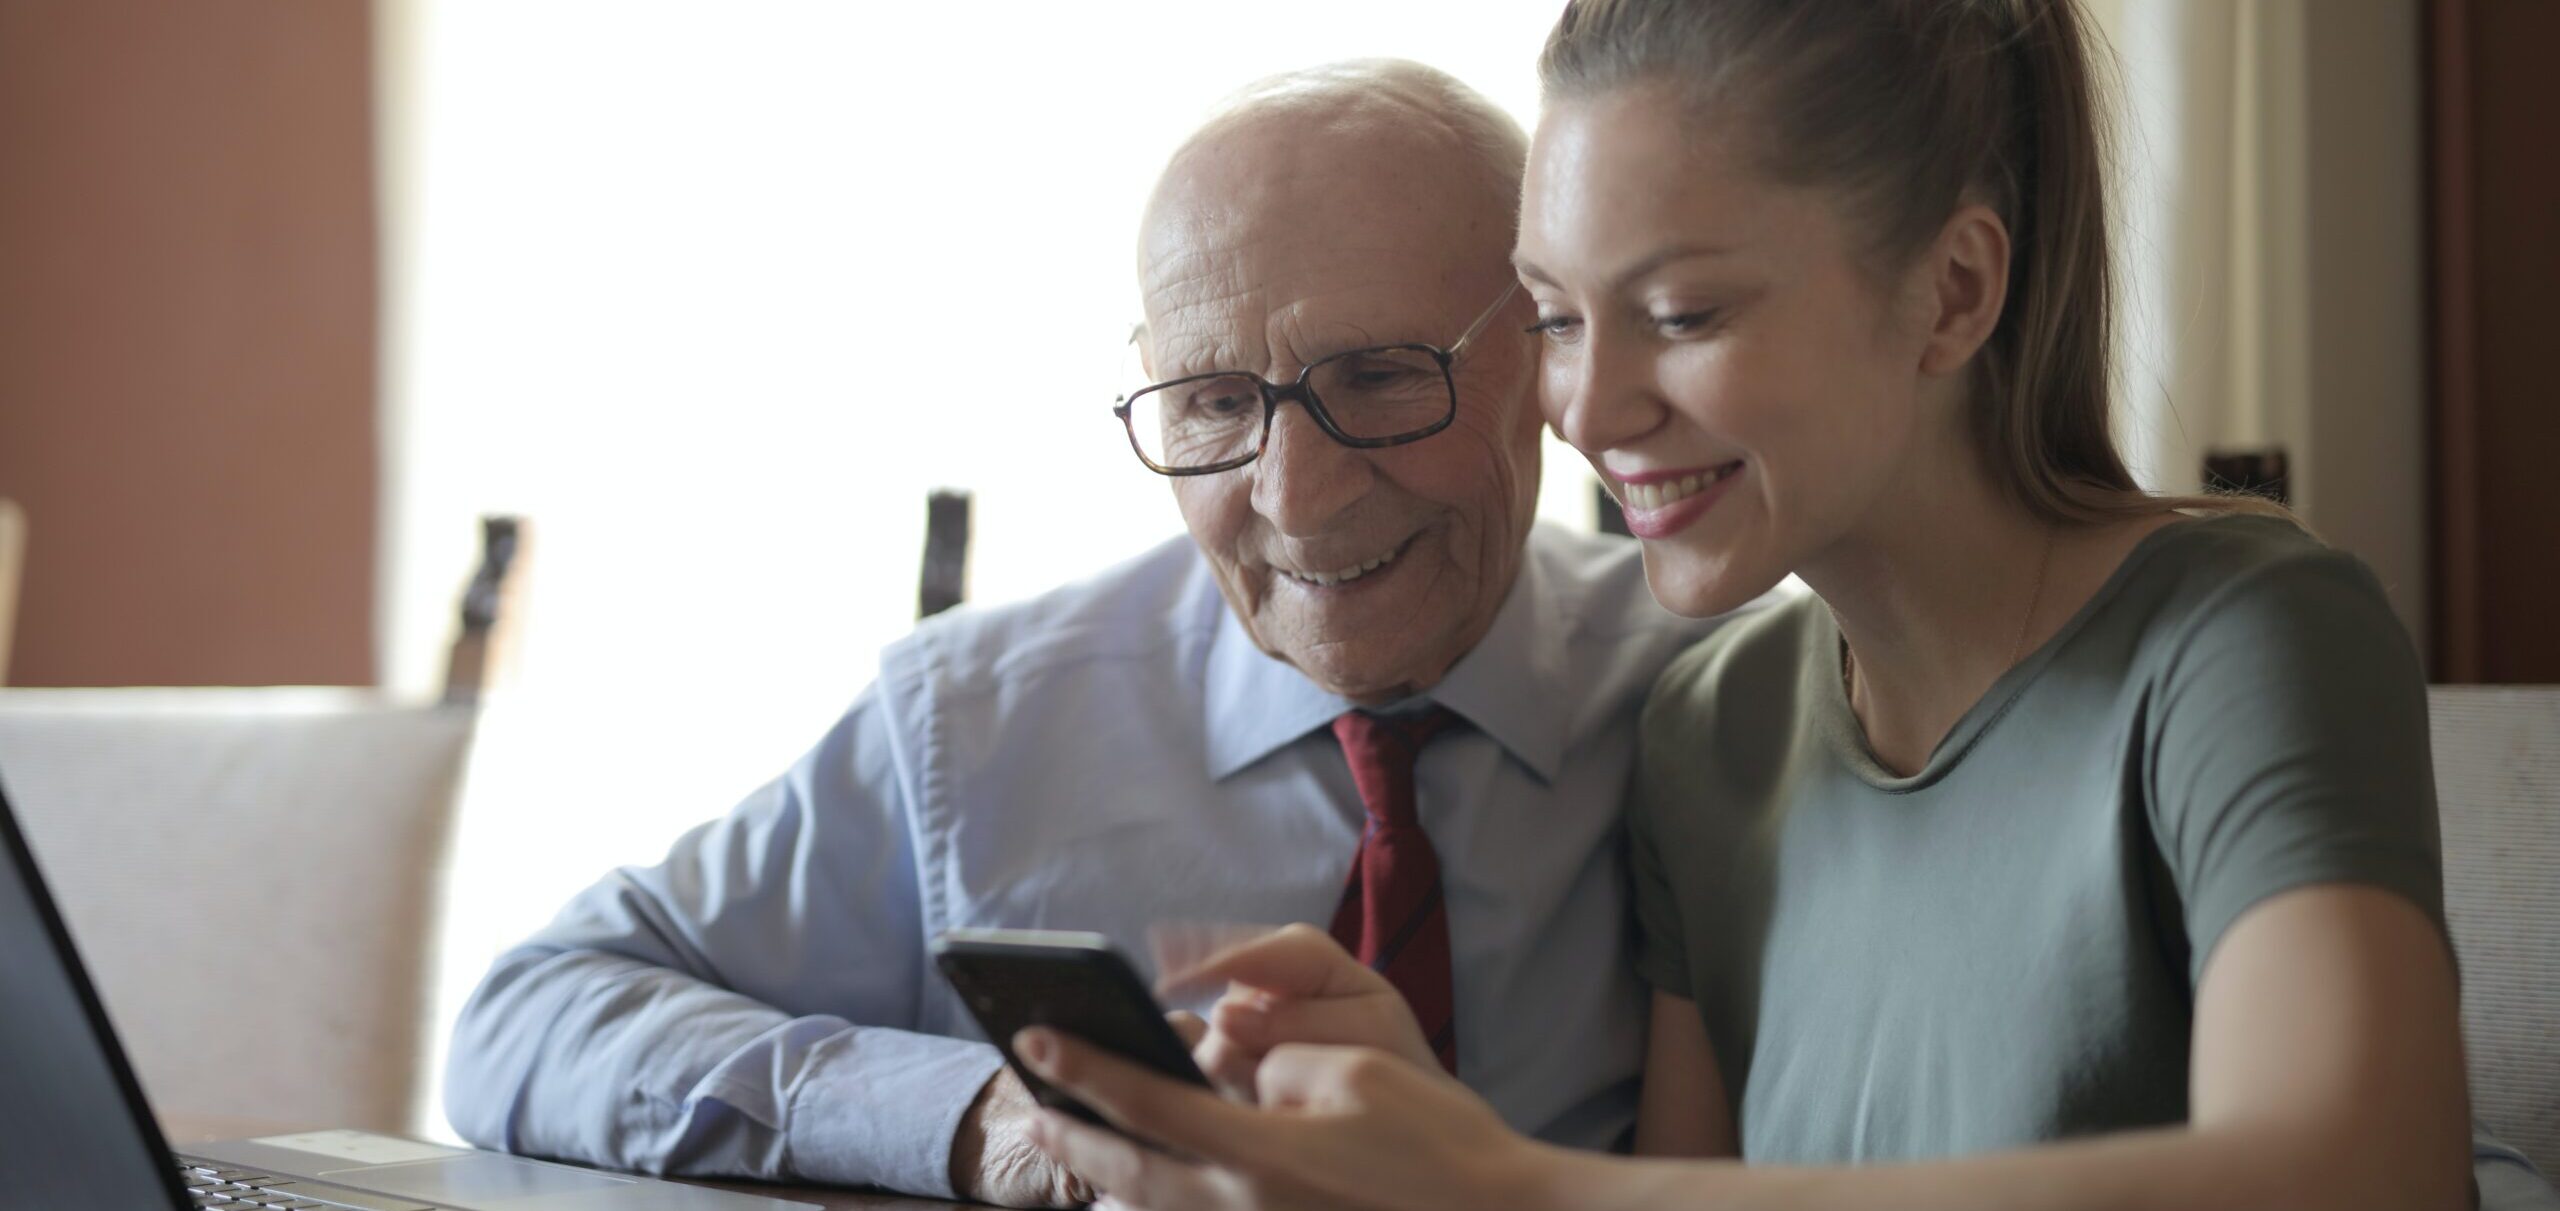 An older person sits with a younger person and they look at a smartphone together.